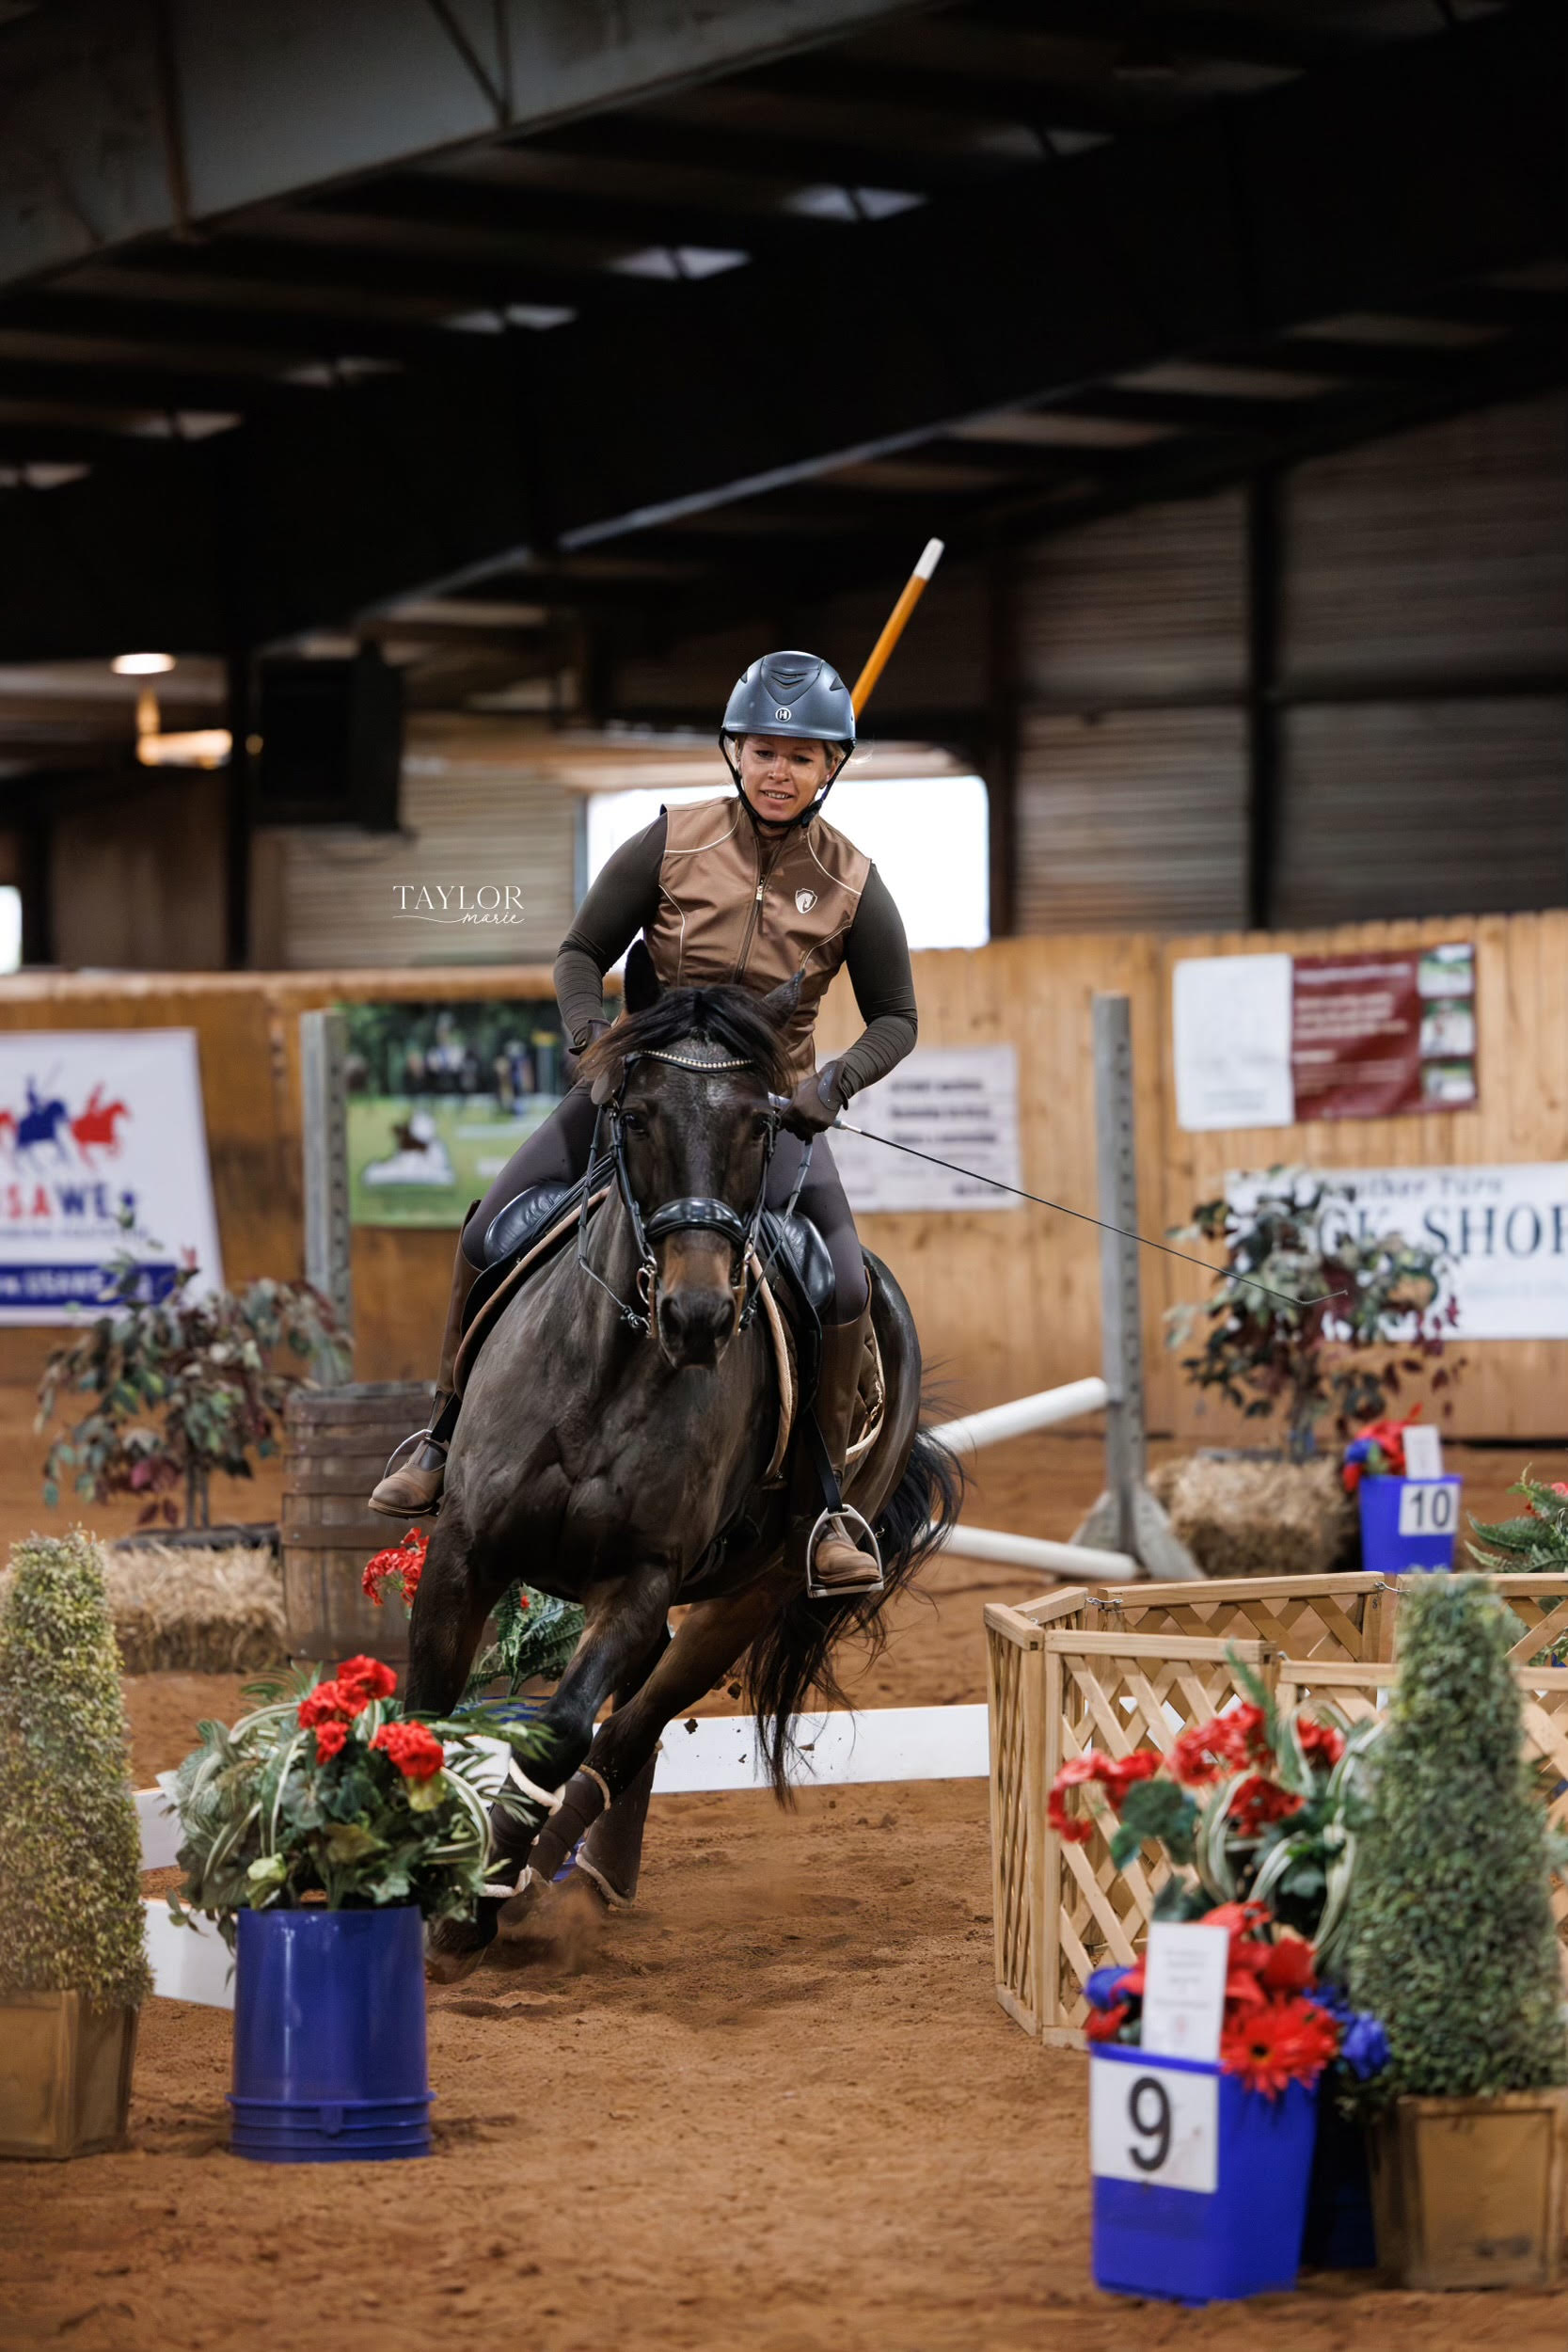 Kasey and “T-Man” riding the Pen at L3/Novice B-Amateur division at the Eastern Zone Championship in Dillsburg, PA